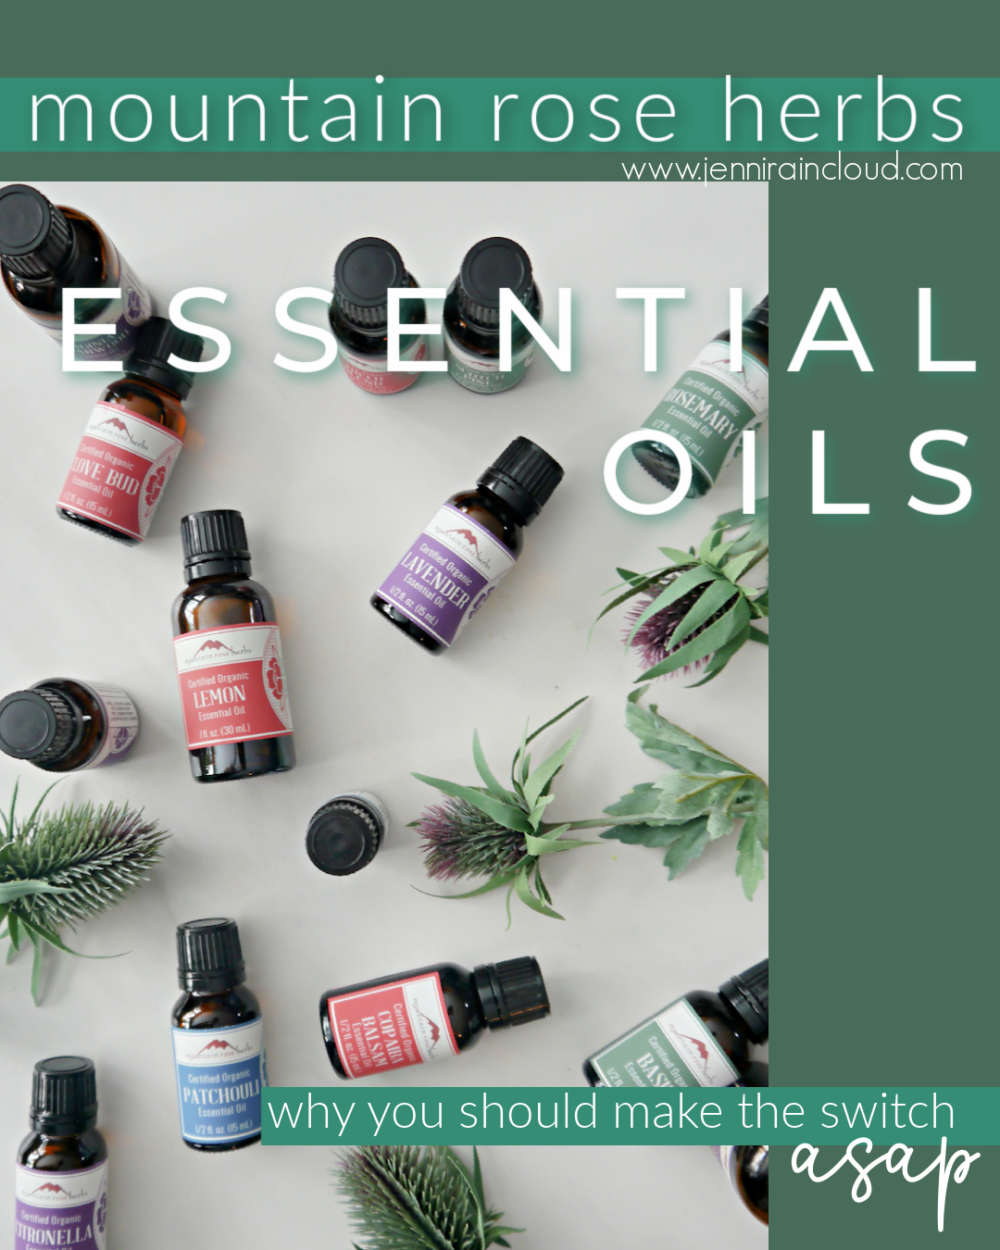 Mountain Rose Herbs Essential Oil Review